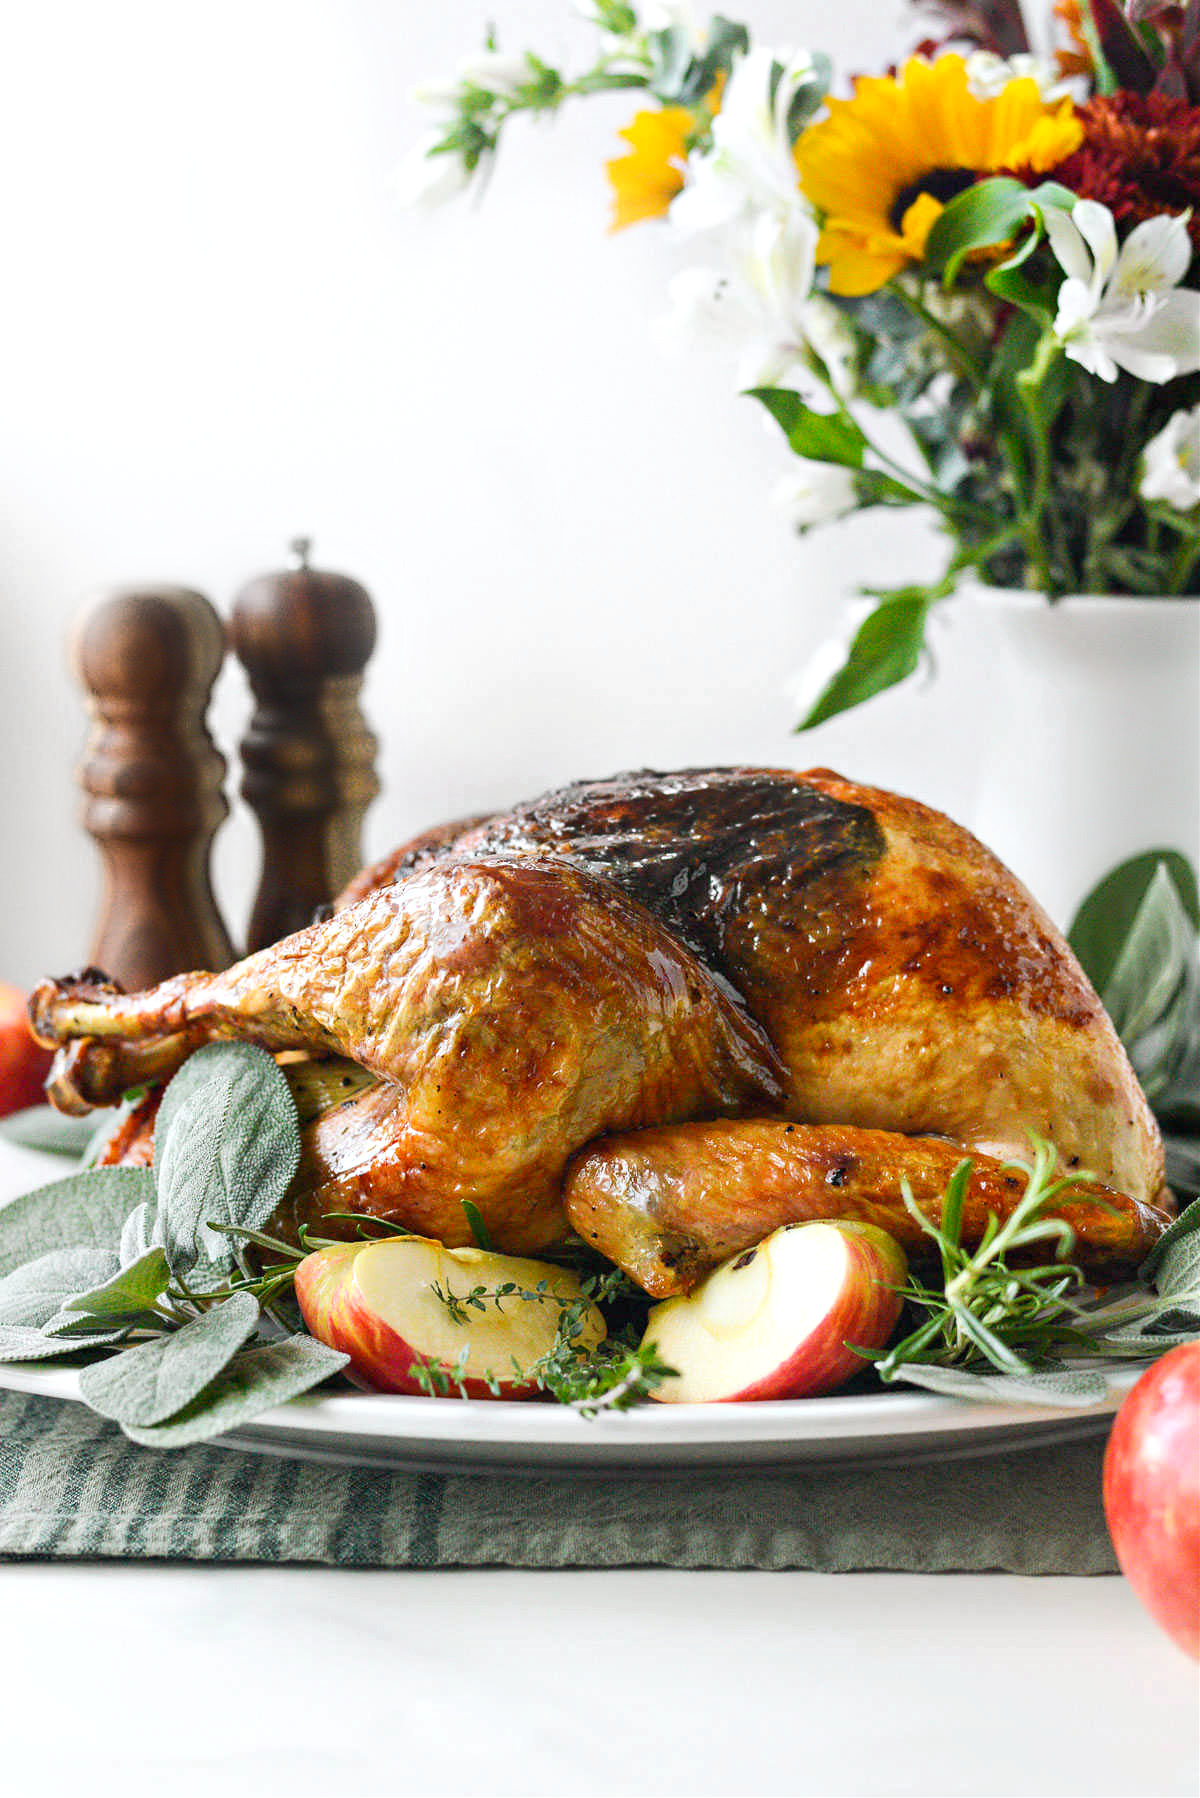 https://www.simplyscratch.com/wp-content/uploads/2021/11/Apple-and-Herb-Roasted-Turkey-l-SimplyScratch-21.jpg